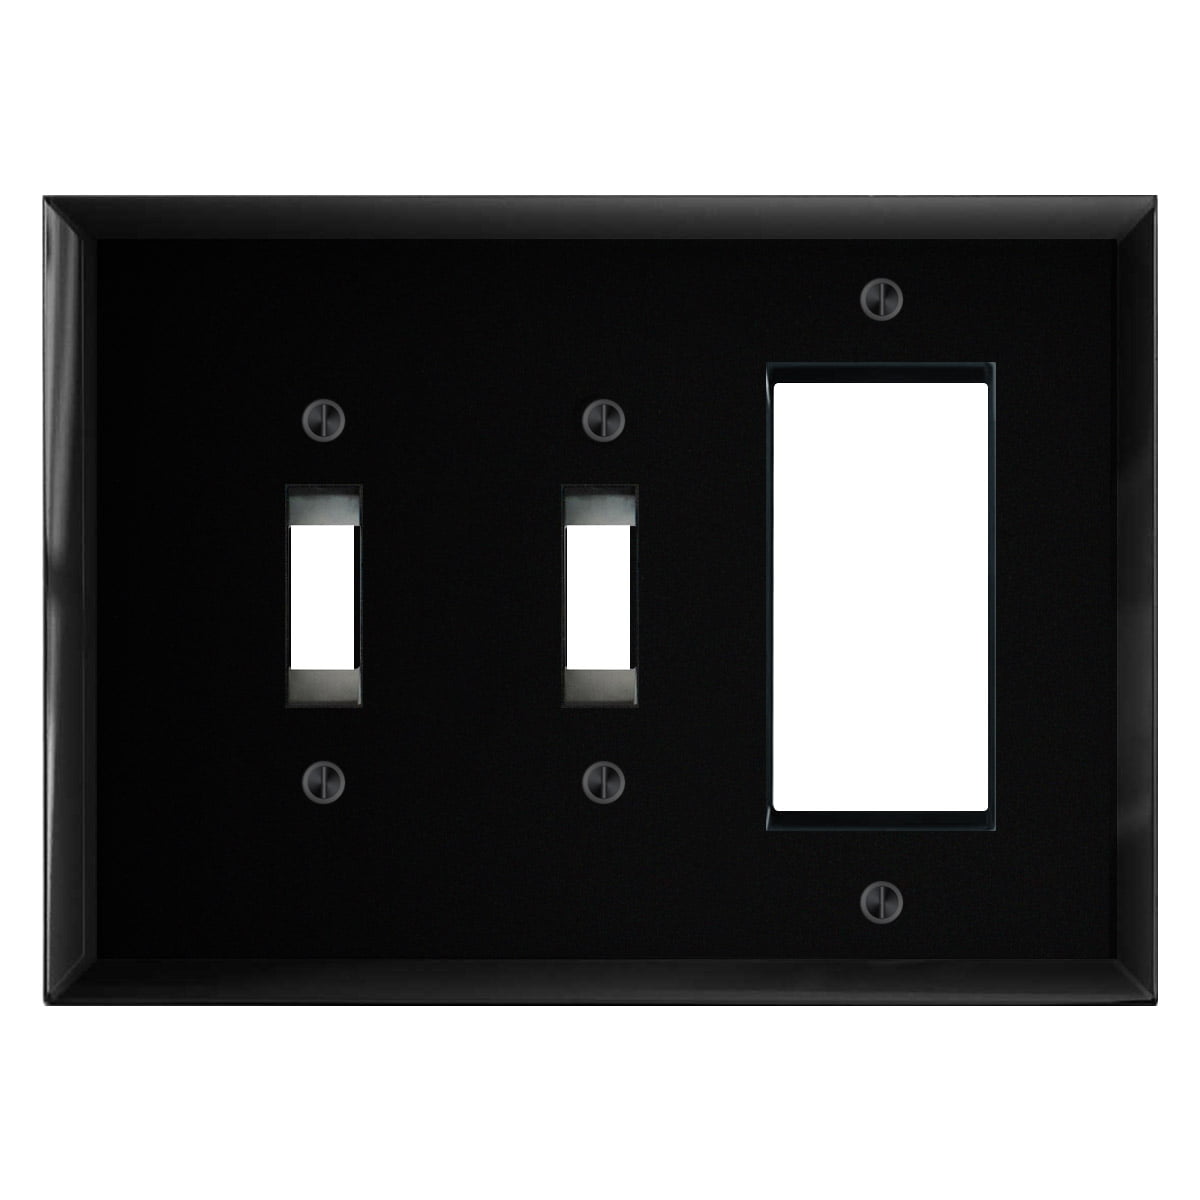 Single Gang Rocker Switch Plate Moon Sun Stars Light Outlet Wall Plate Decorator Wallplate Cover 2.9'' x 4.6'' Art Plates for Home Office